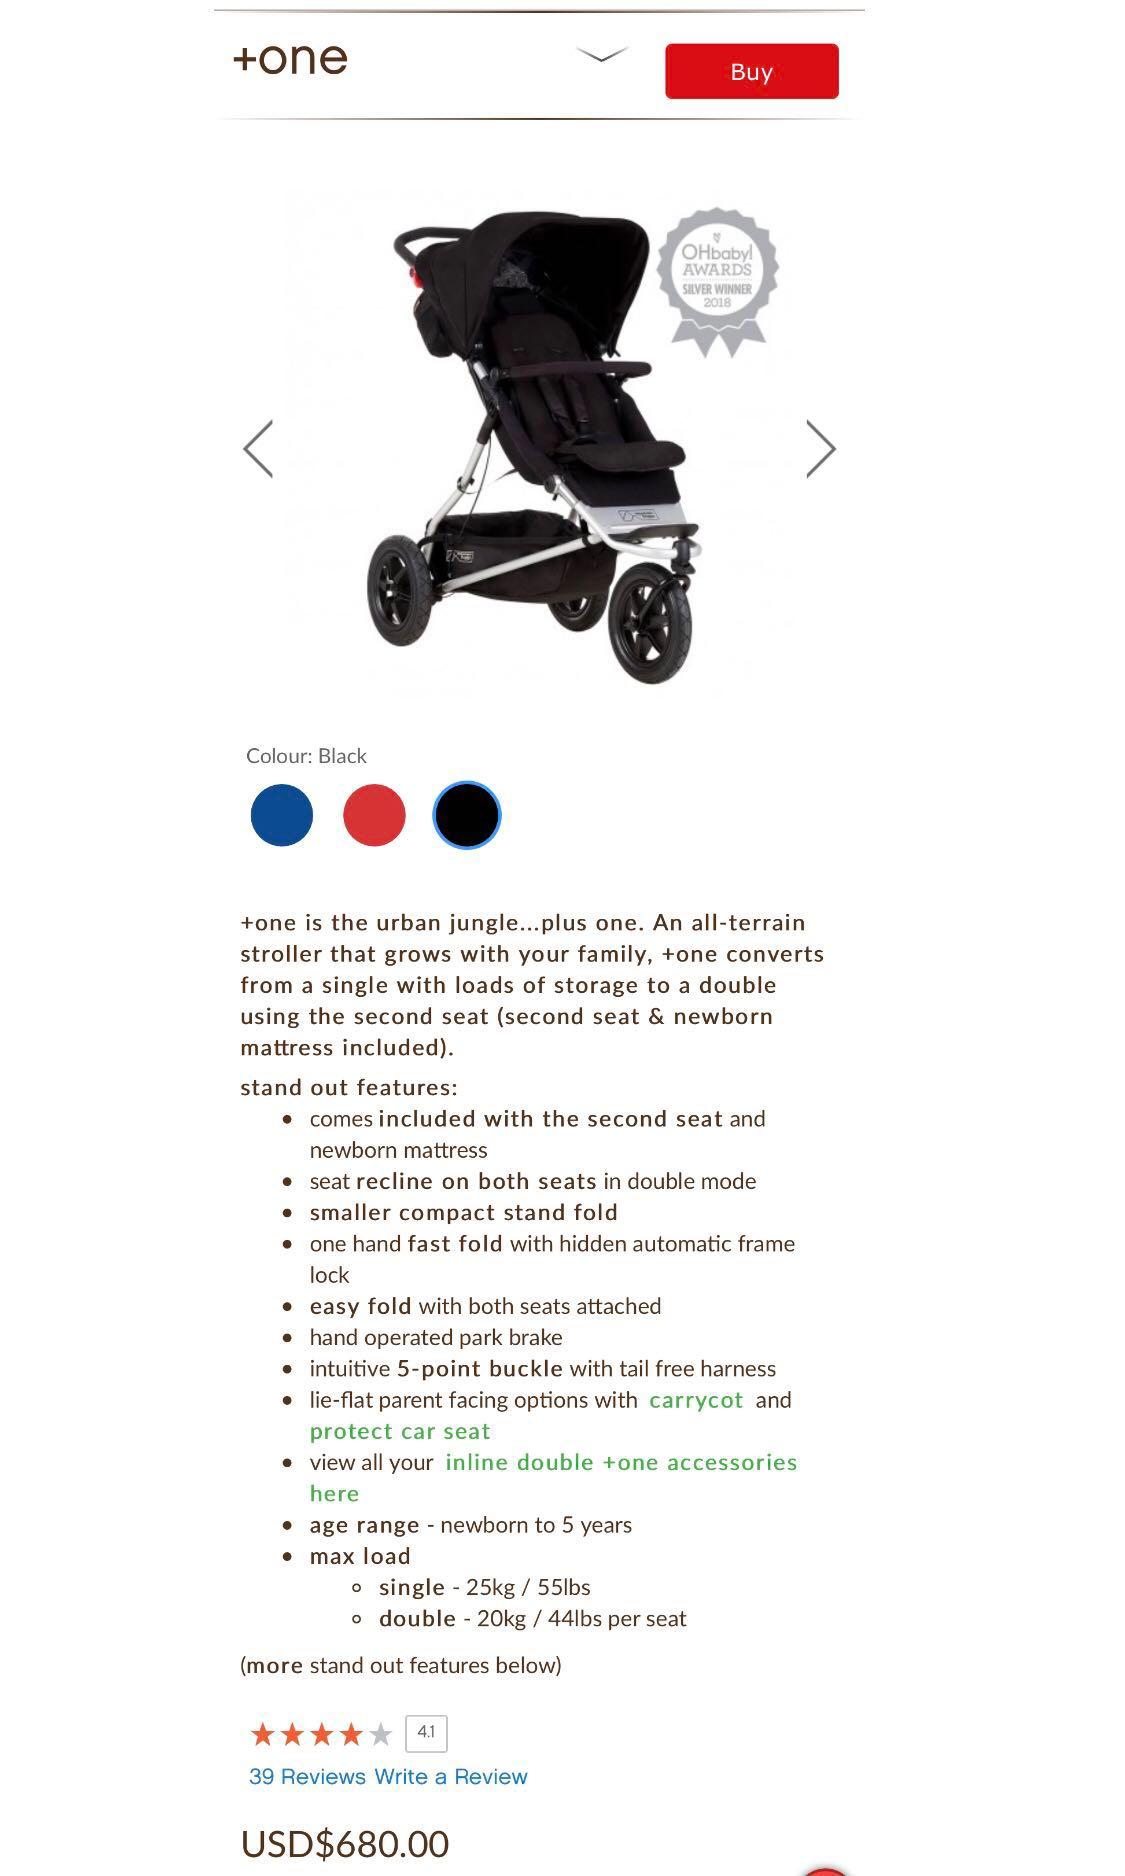 4 in 1 buggy